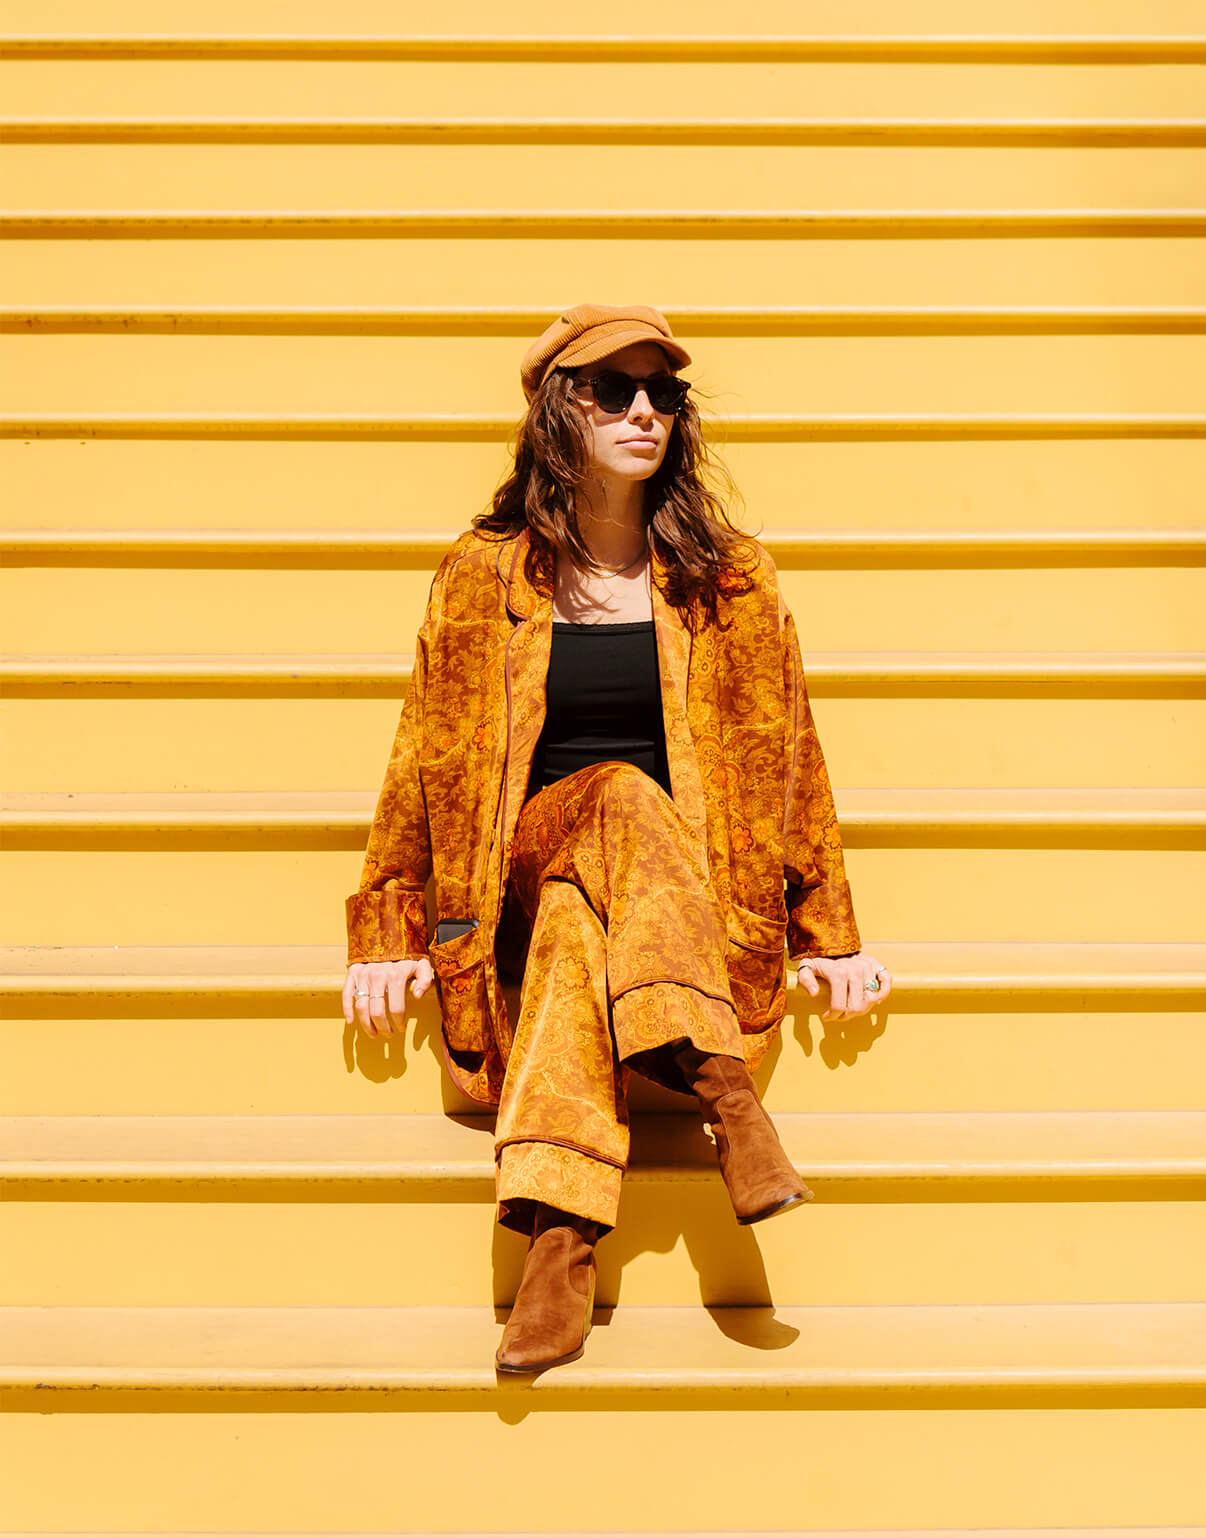 Photo by Brandon Lopez of velvet-clad woman sitting on endless yellow stairs